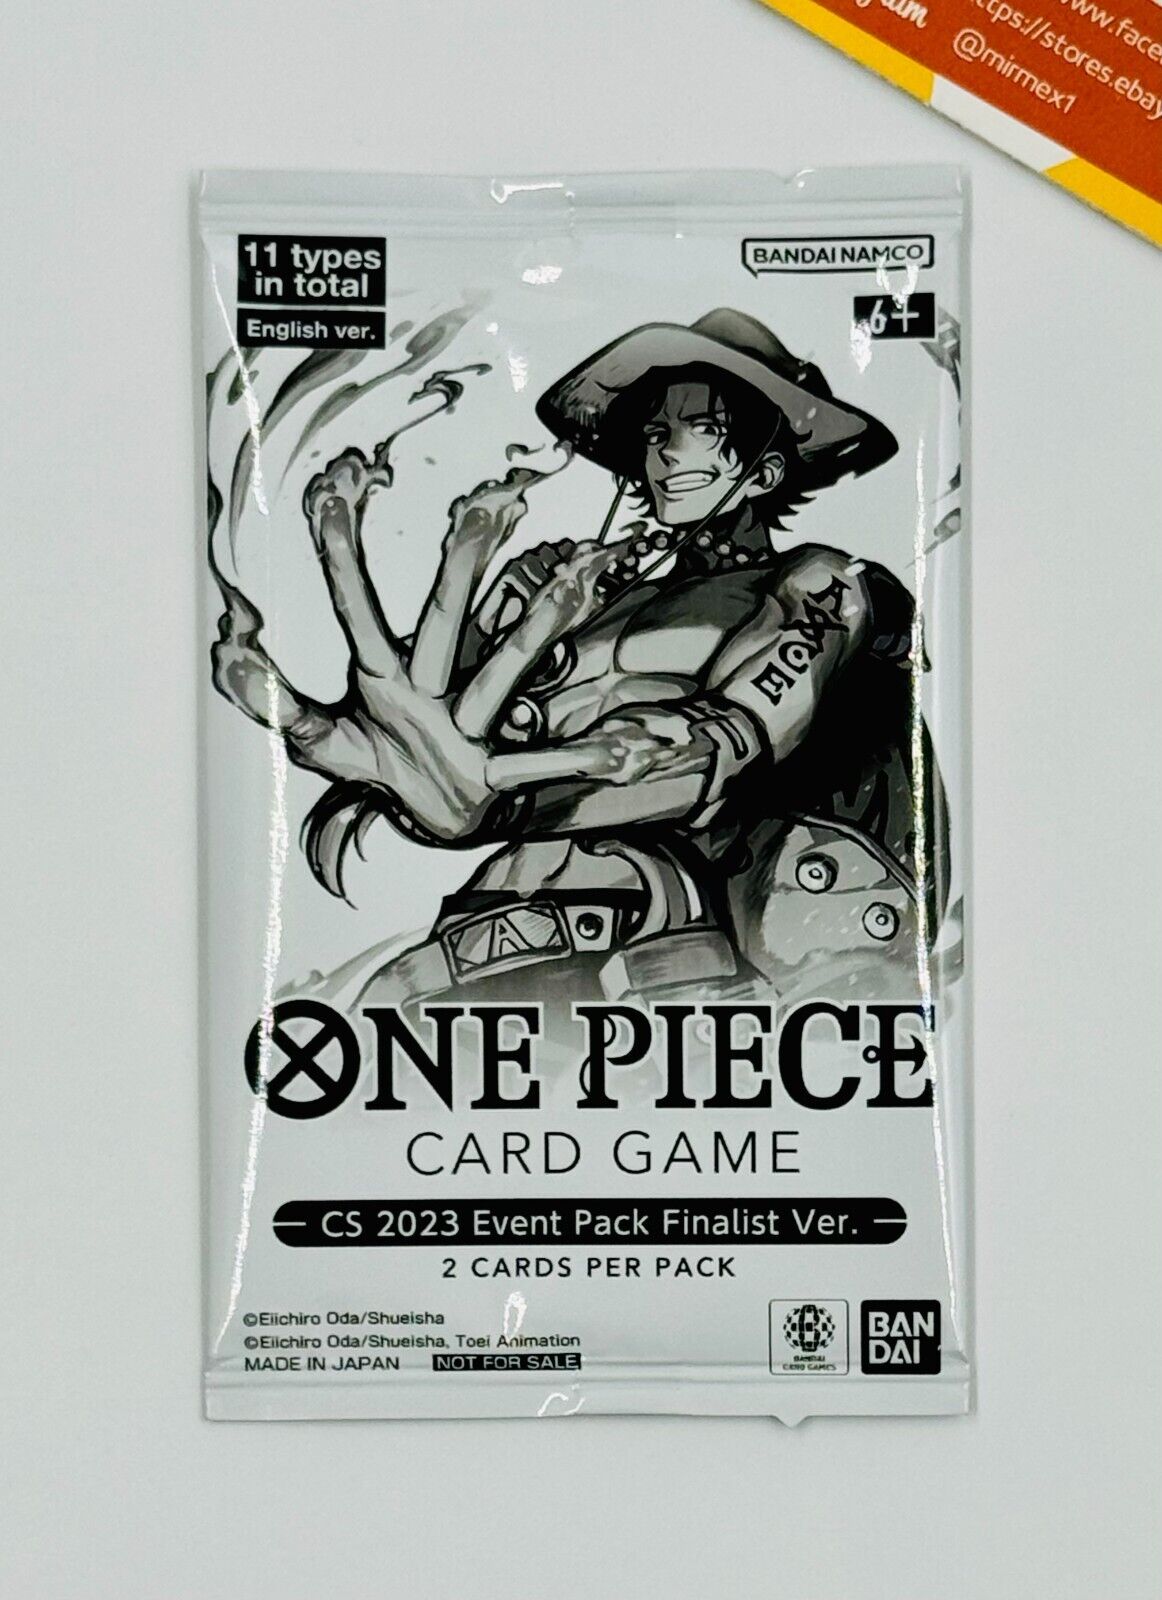 One Piece Booster Pack Event Pack Finalist Ver. CS 2023 English